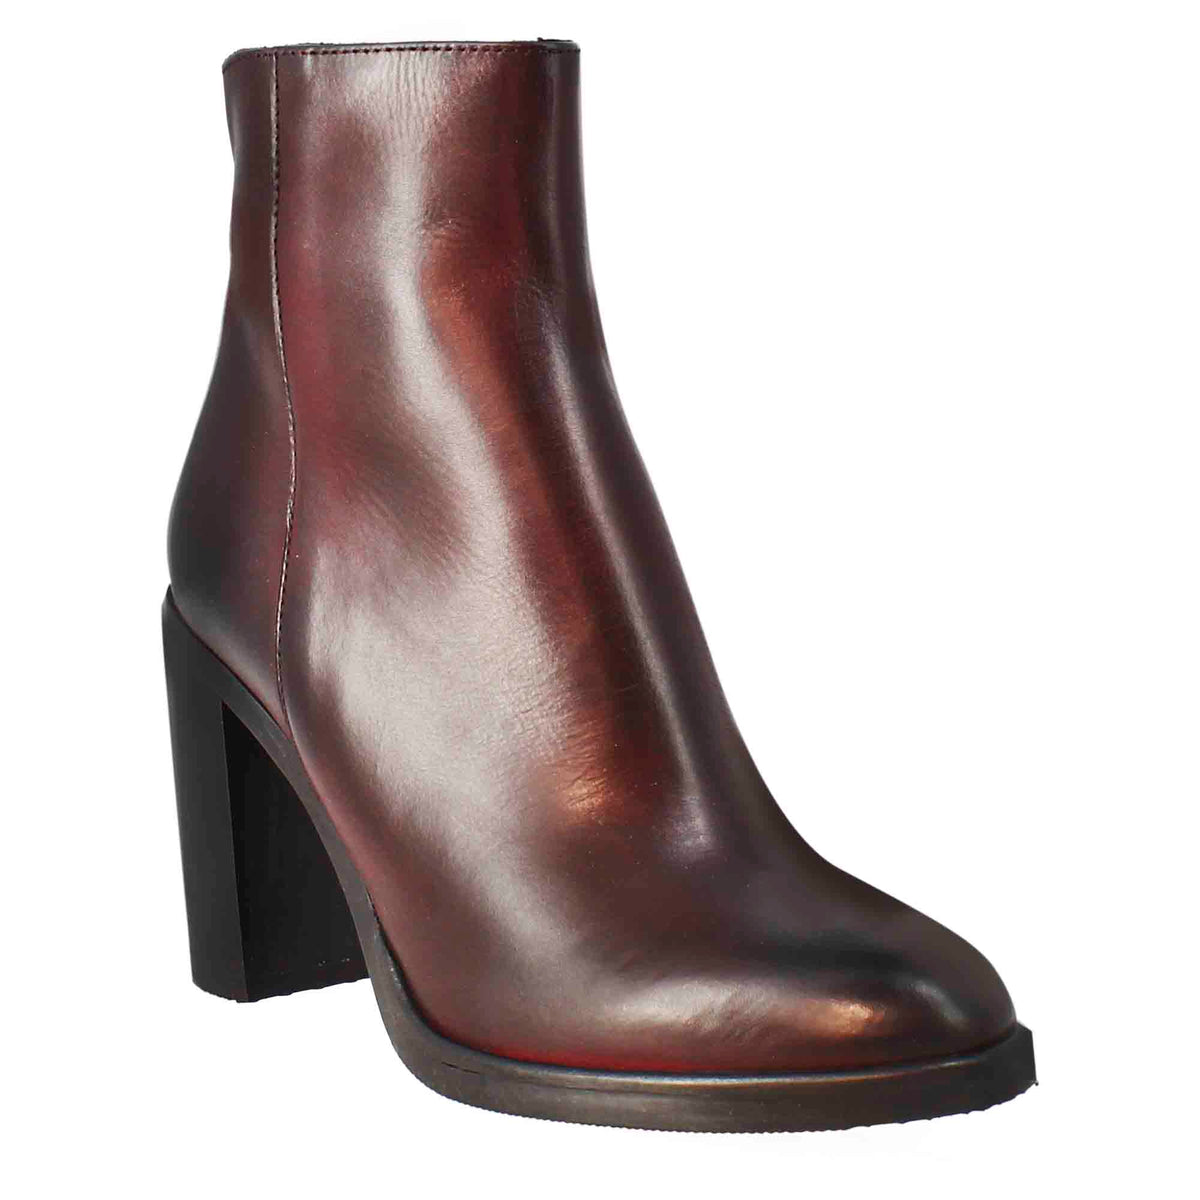 Women's smooth ankle boot with high heel in burgundy leather